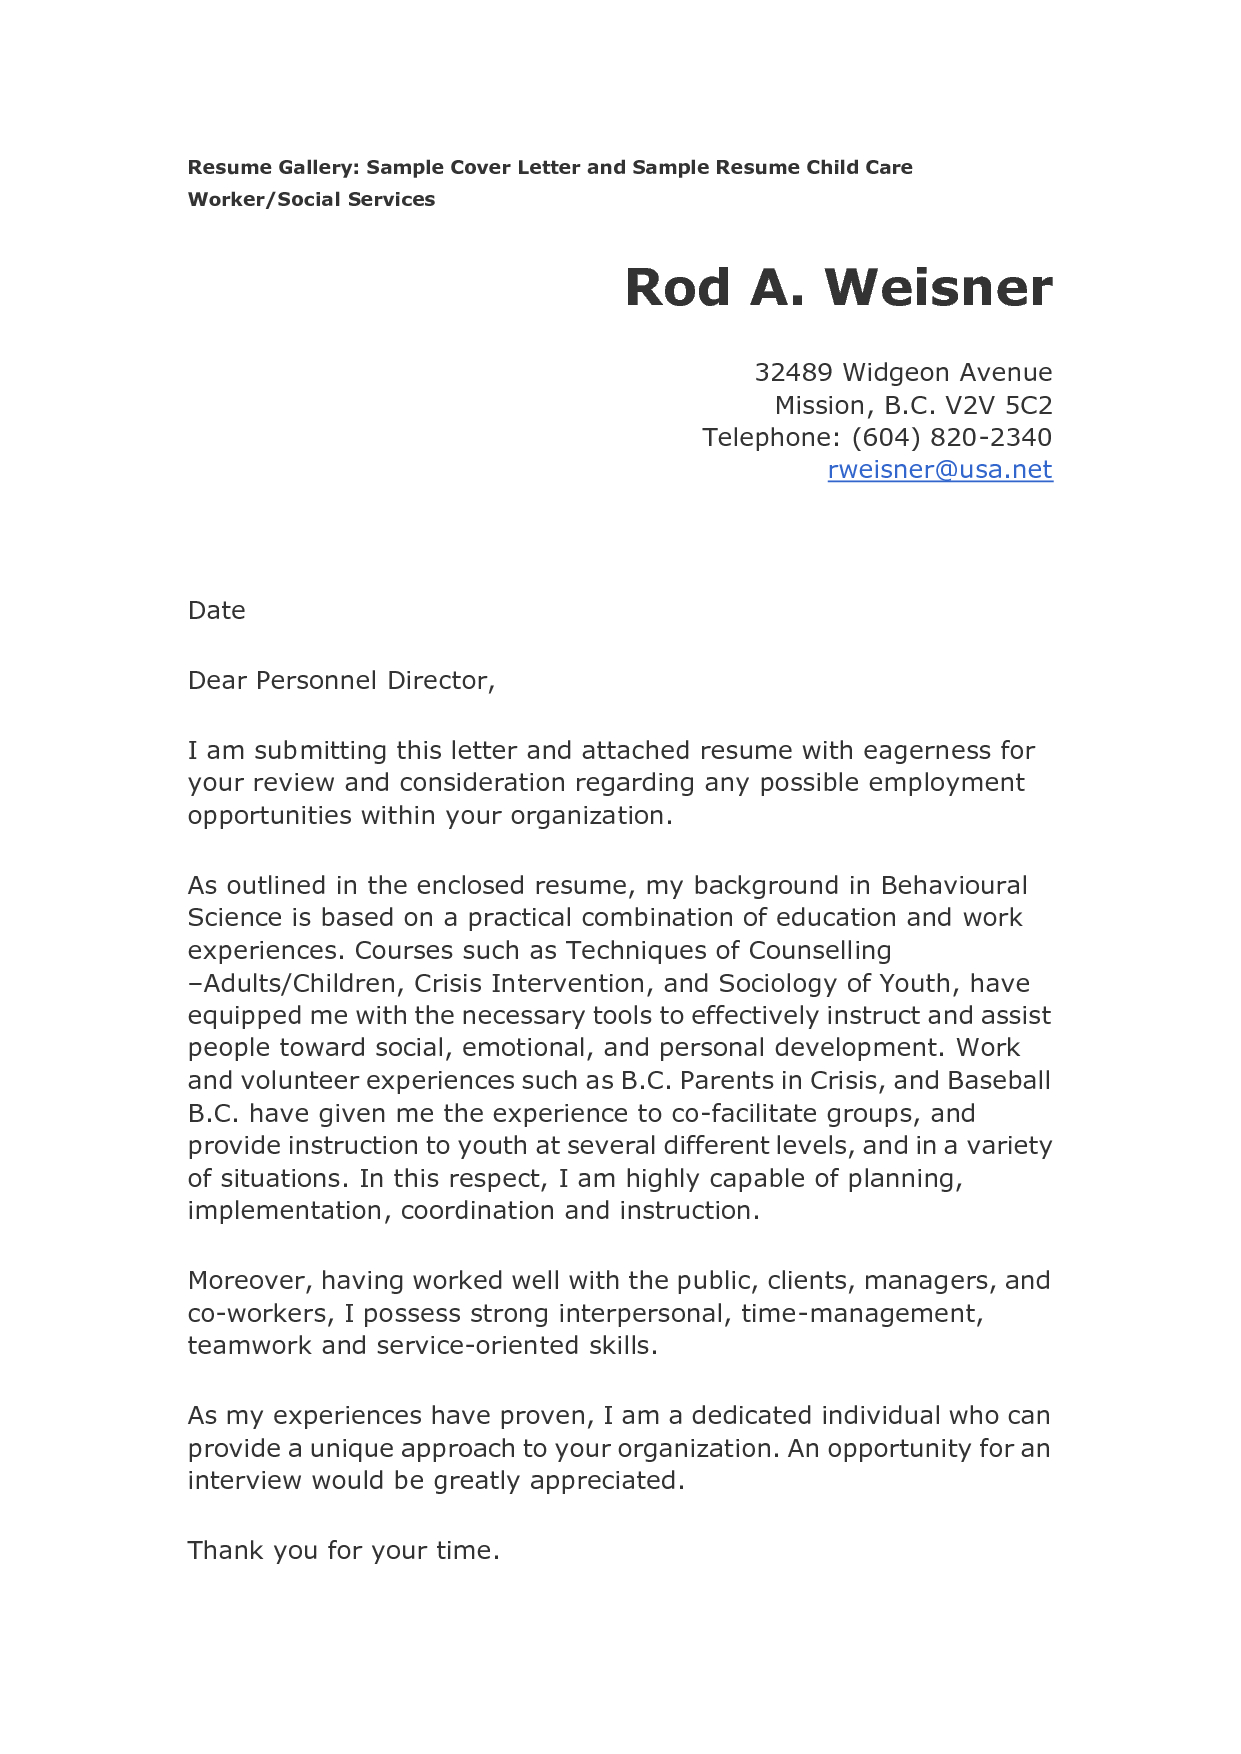 Child Care Cover Letter Australia Cover Letter Cover intended for dimensions 1241 X 1754